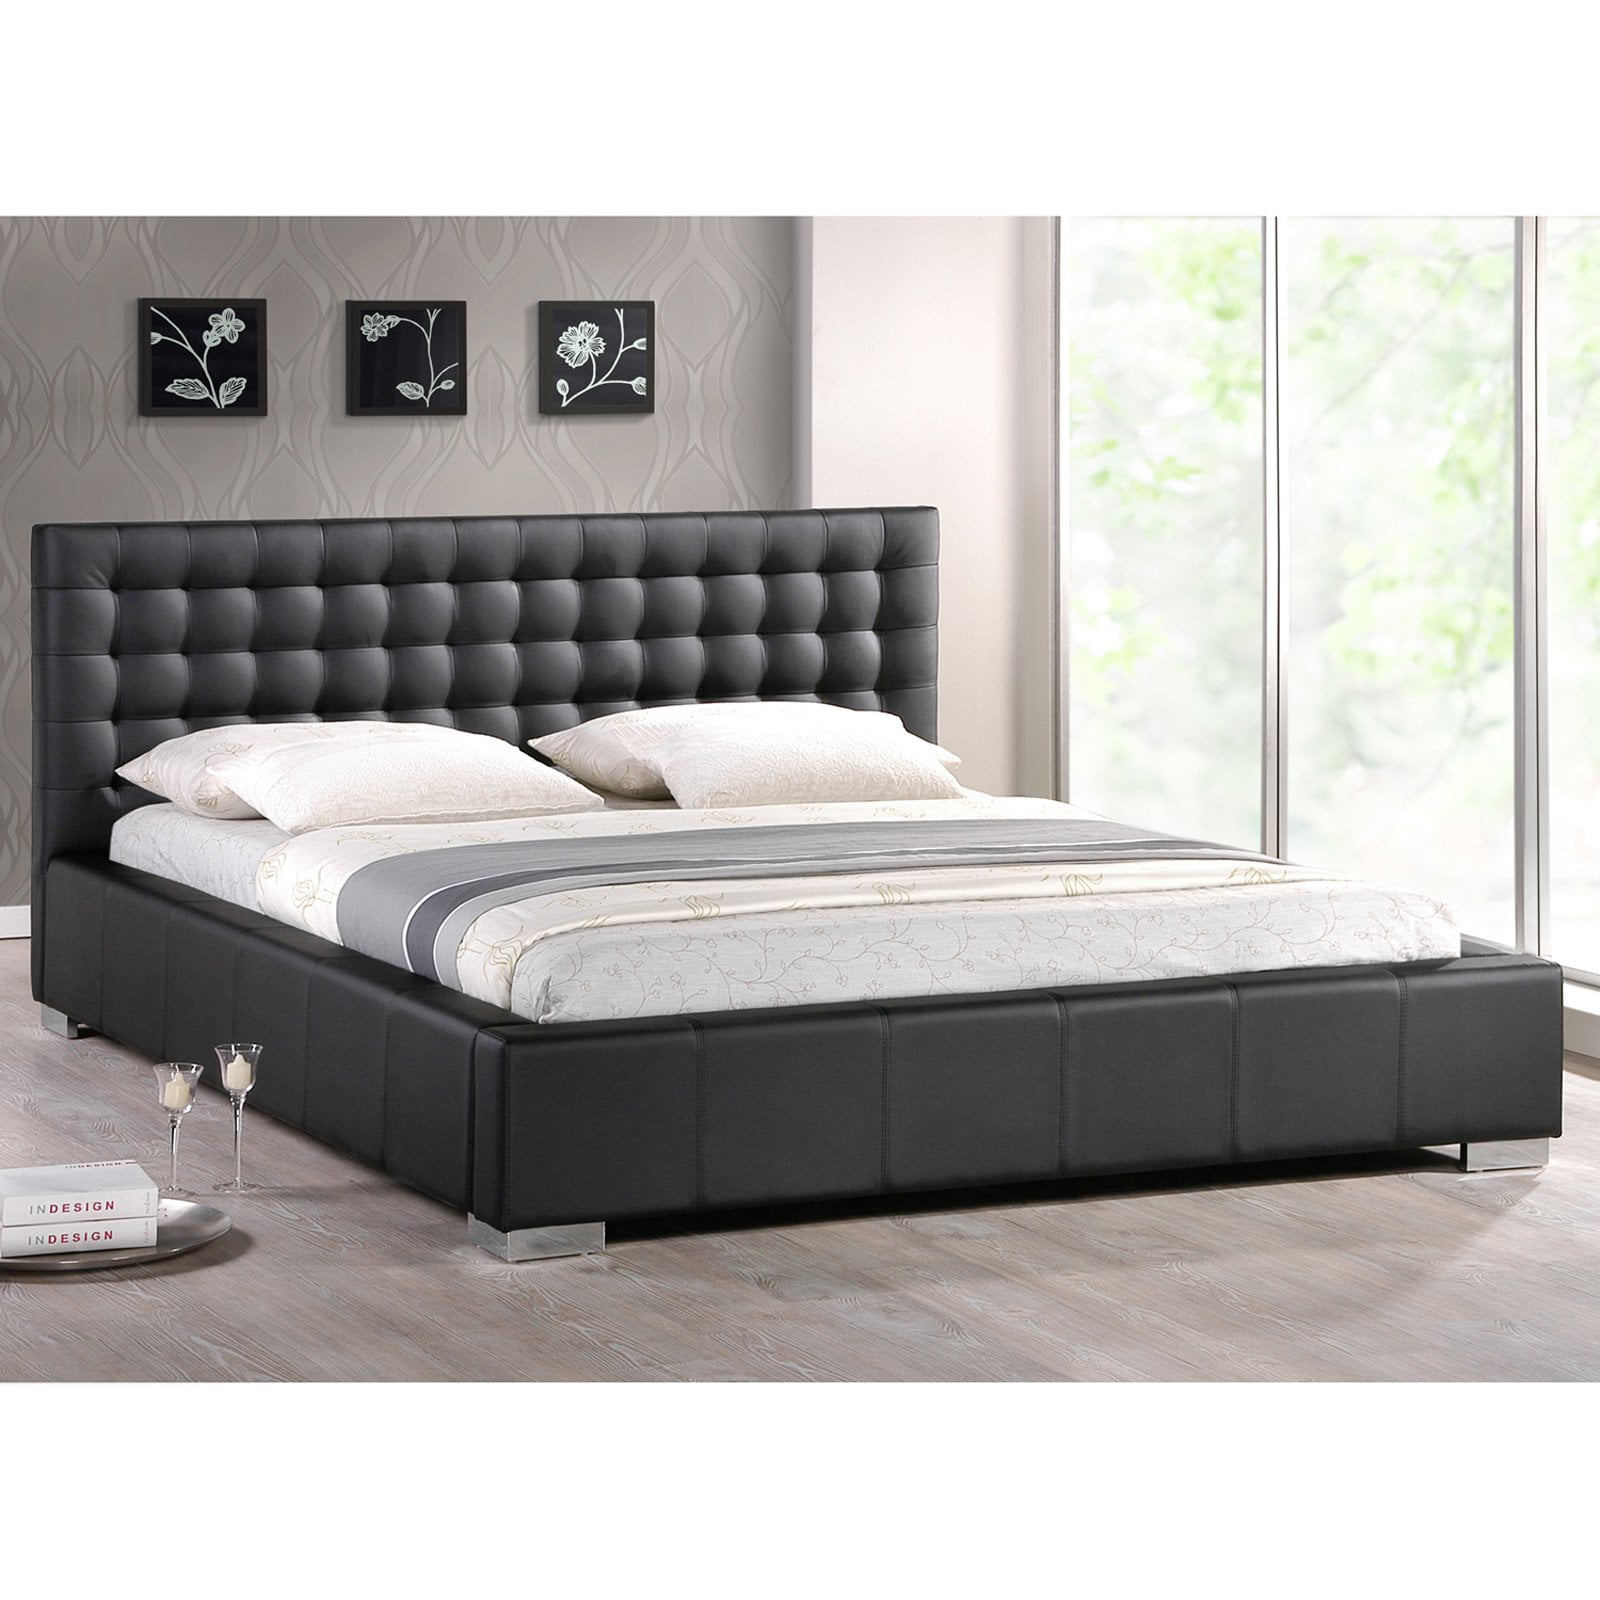 Bowery Hill Tufted Queen Platform Bed, Baxton Studio Bianca Queen Platform Bed With Tufted Headboard In White